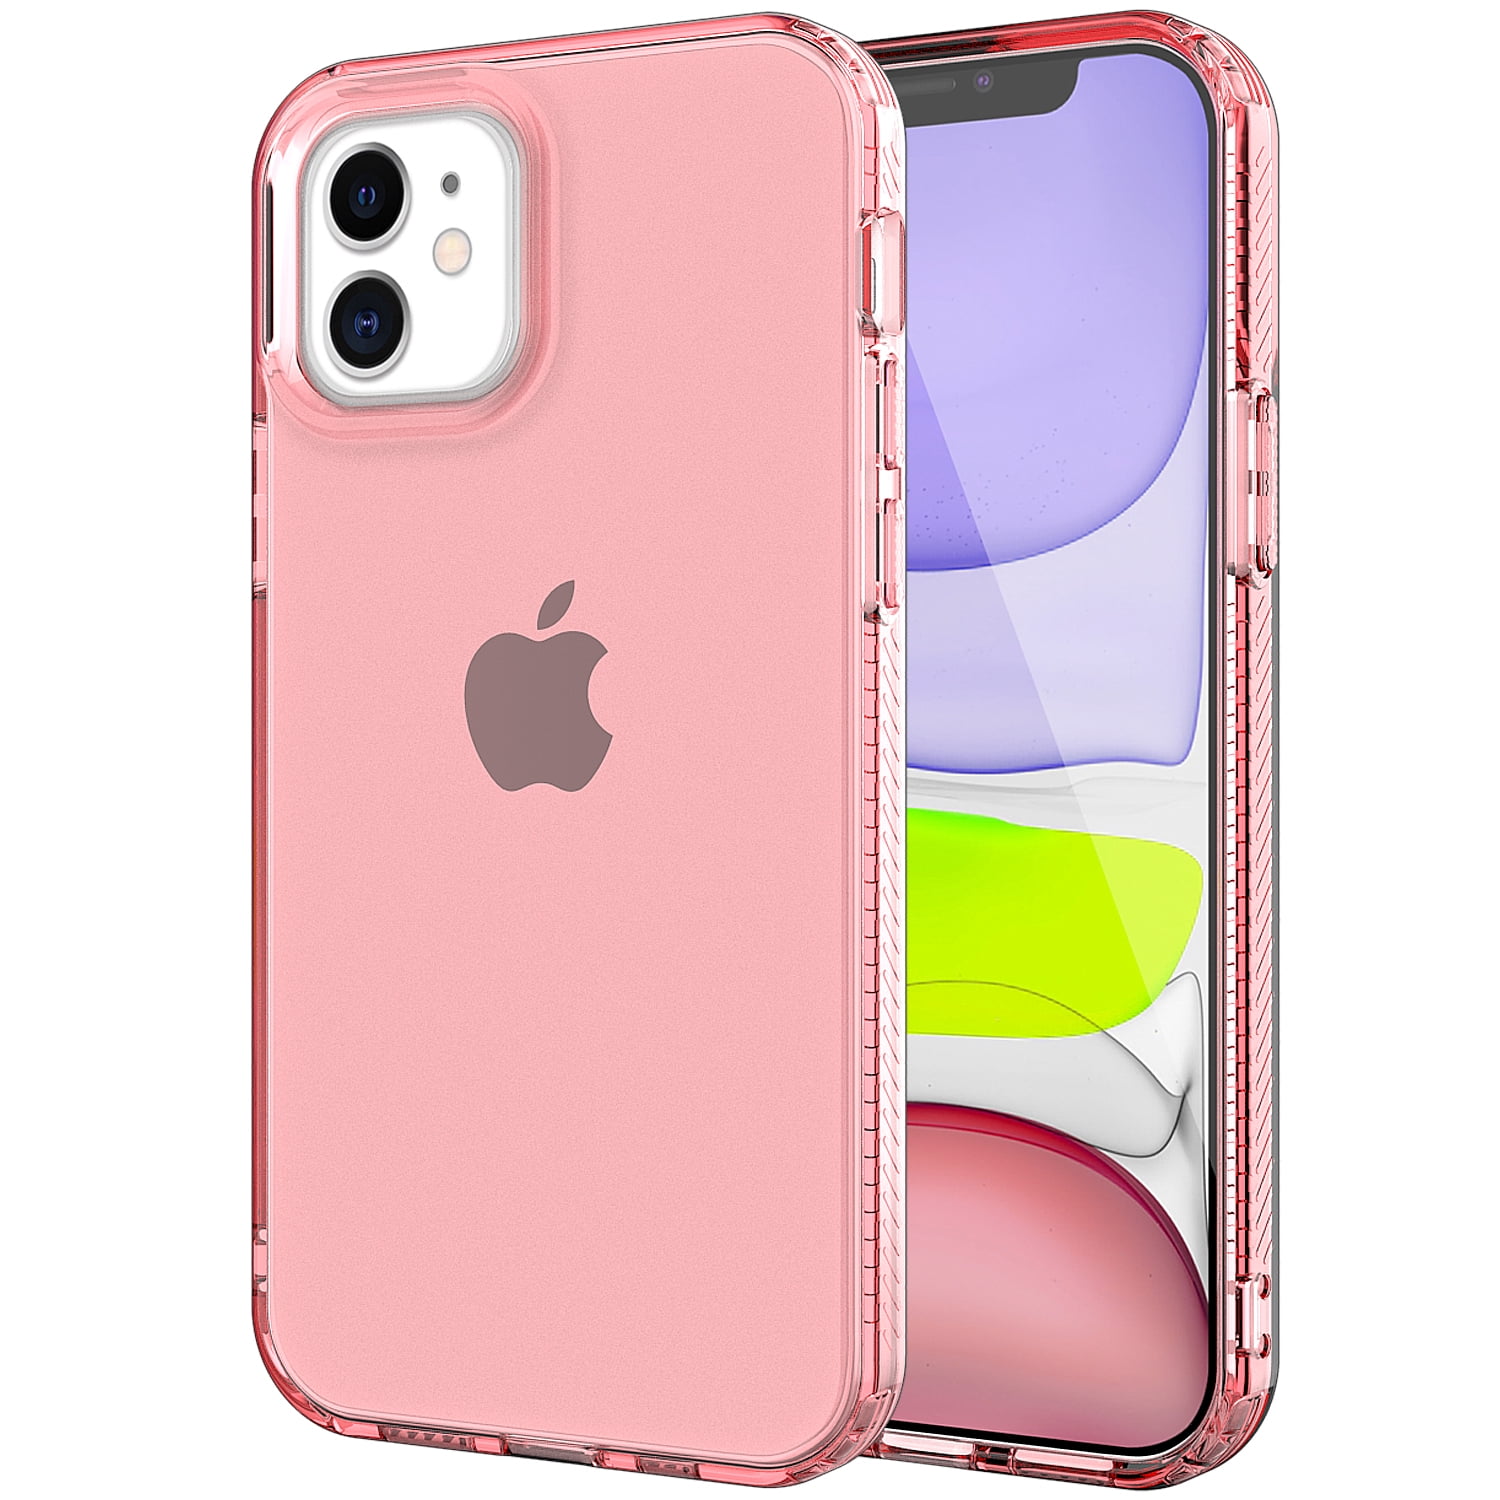 iPhone 11 6.1 Case with Built in Screen Protector, Allytech Full Body  Shockproof Dual Layer High Impact Protective Anti-Scratch Soft TPU Cover  Cases for iPhone 11 6.1 inch 2019, Clear 